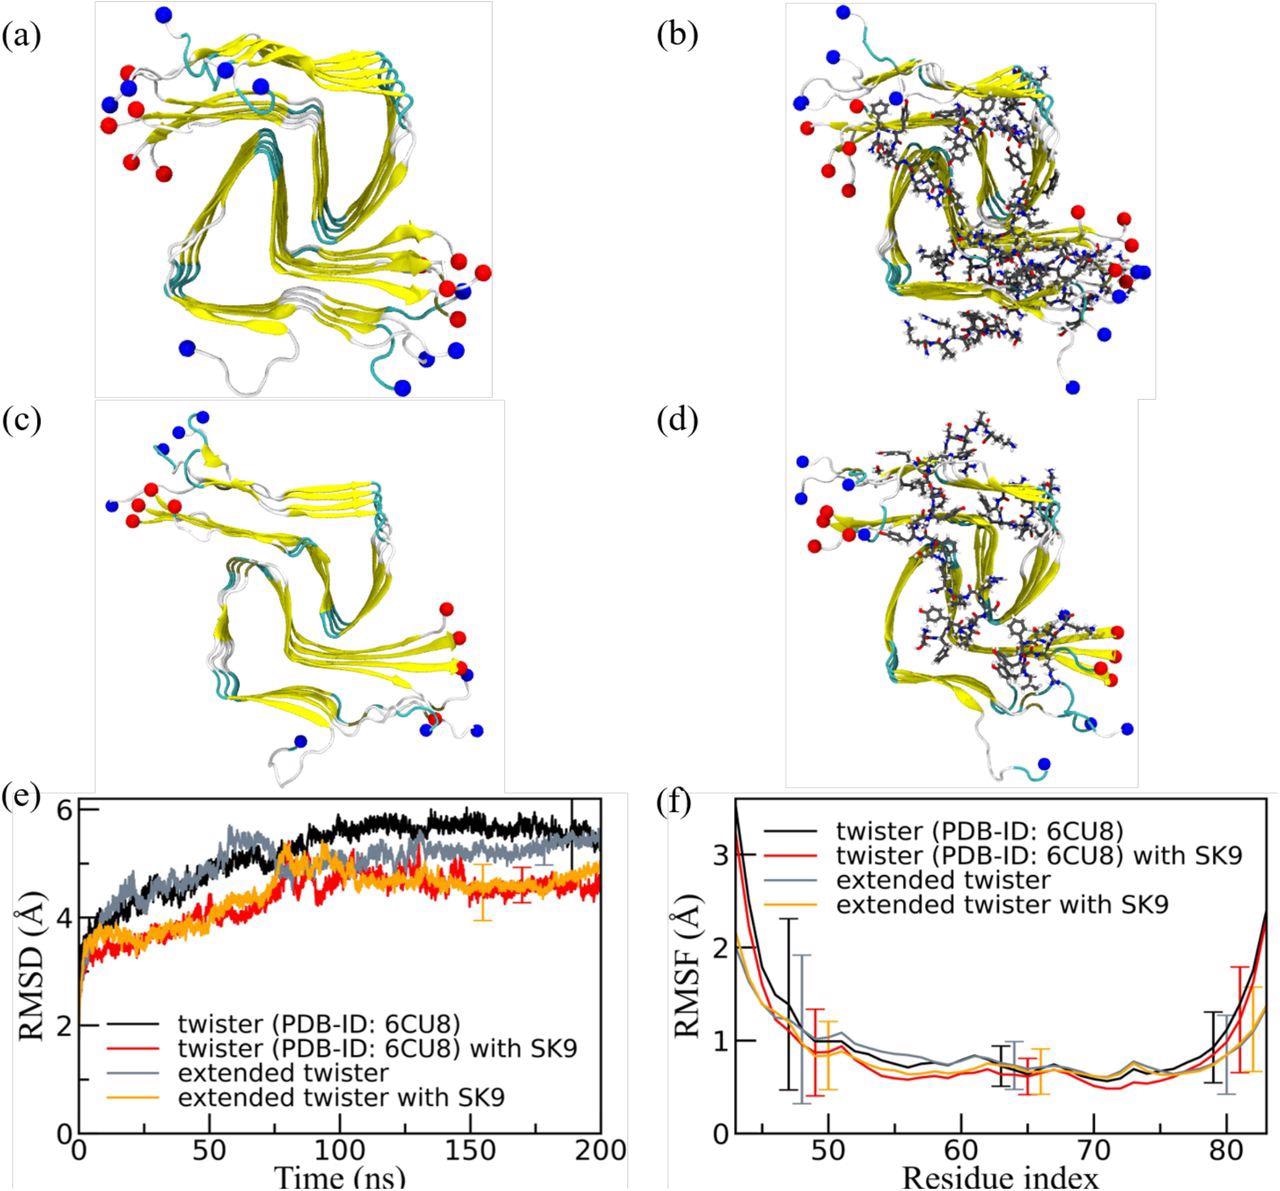 Representative final configurations extracted from simulations starting from (a) the experimentally determined twister-like α-synuclein fibril model (PDB-ID: 6CU8) and (c) the extended model. Corresponding final snapshots extracted from simulations in the presence of SK9-segment are shown in (b), and (d). N- and C-terminus are represented by blue and red spheres, respectively. Only residues 43-83 are shown for the extended model configurations in (c) and(d). The time evolution of the RMSD in the simulation of these systems is shown in (e), and residue-wise RMSF in (f). We calculate RMSD and RMSF again only for the experimentally resolved region 43-83, i.e., ignoring the disordered and unresolved parts of the fibril models, considering all backbone atoms. Only a few typical errorbars are shown to make figures more readable.